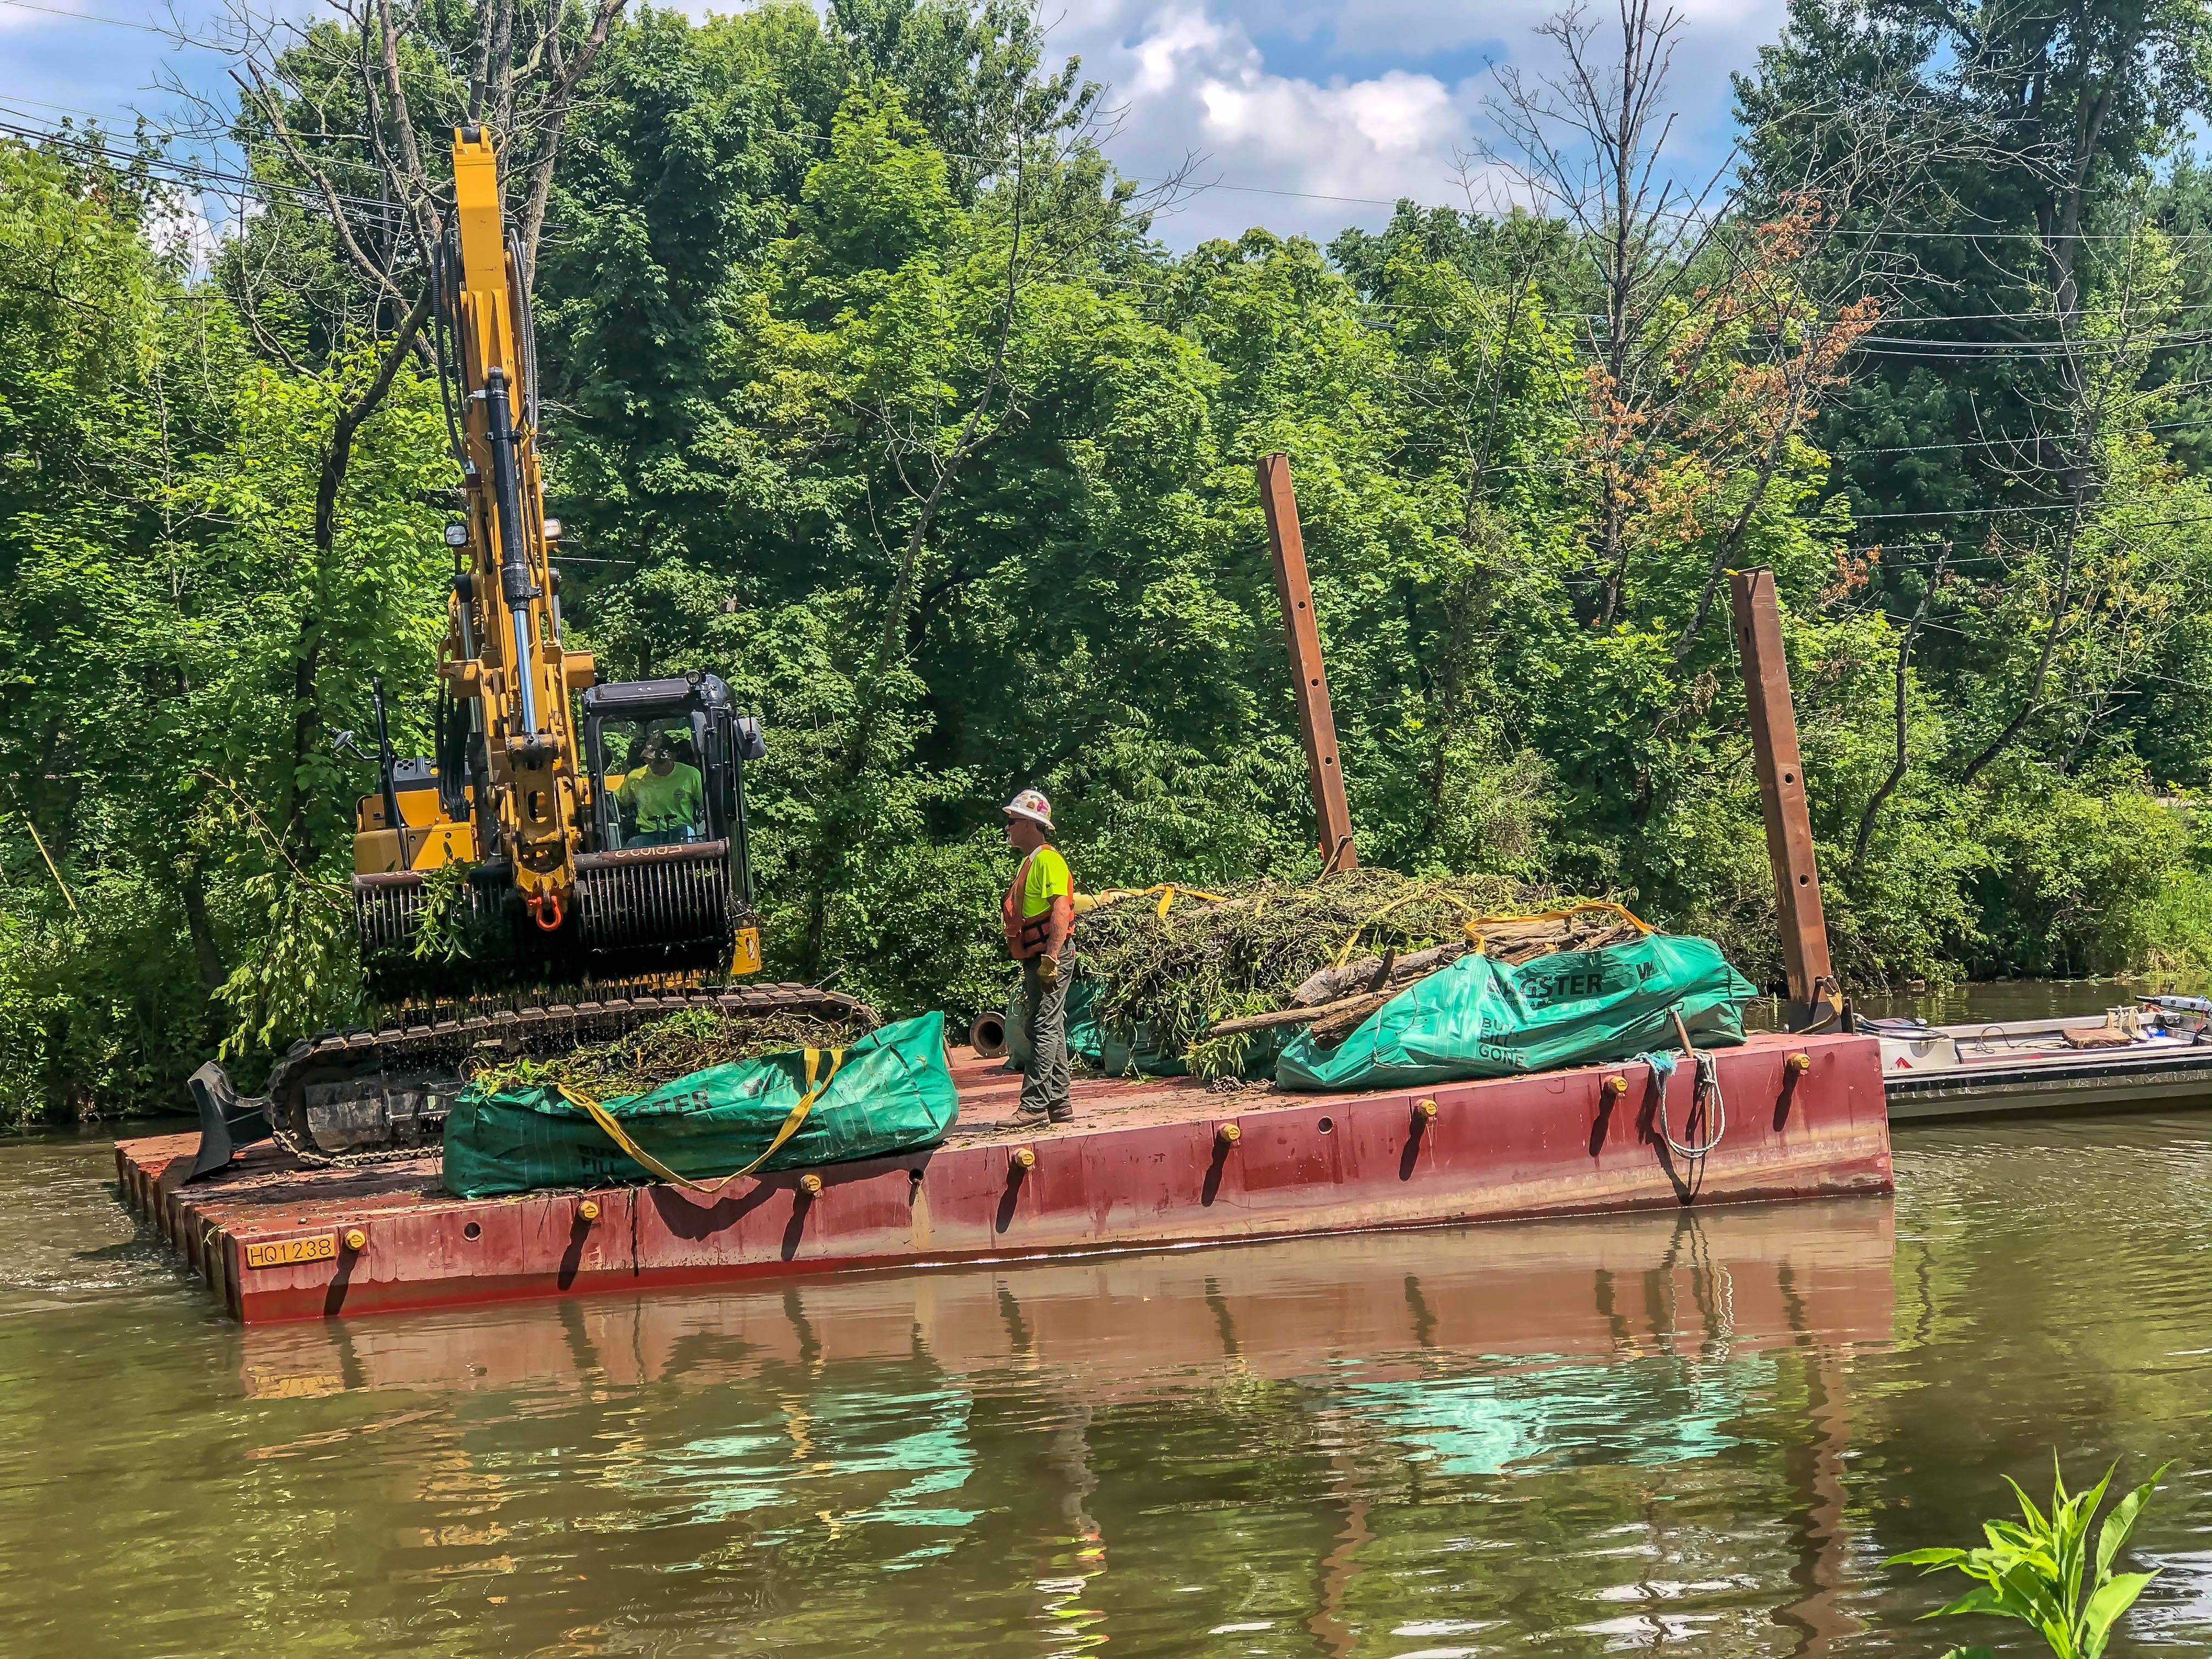 D&R Canal Dredging, Picture courtesy of NJ Water Supply Authority